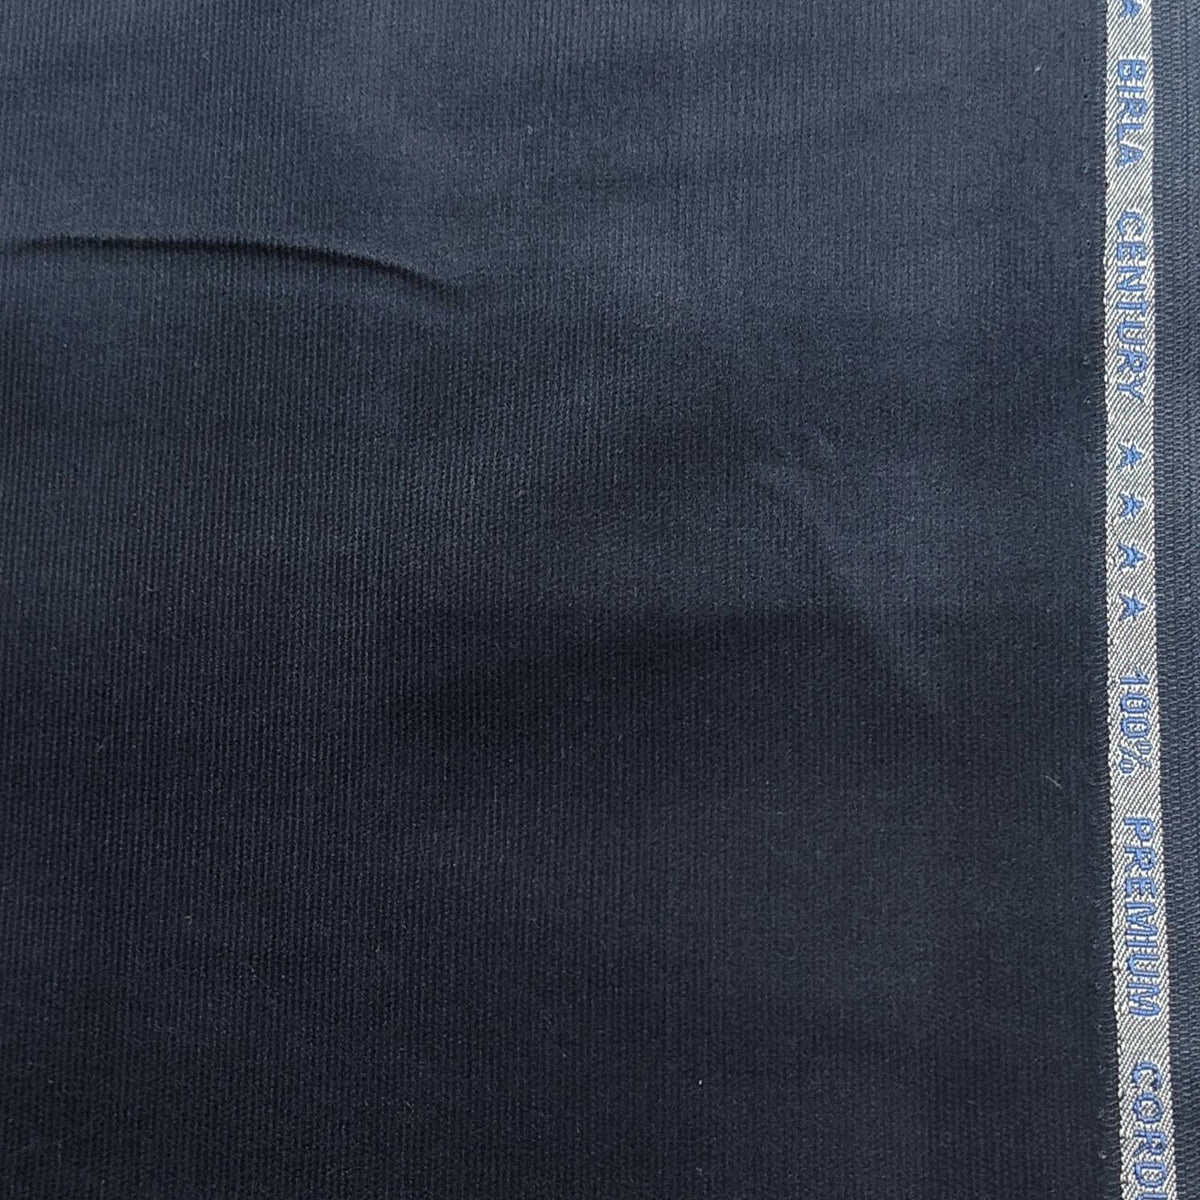 Ruby Fabrics Linings Unstitched Navy-Blue and Dark Blue Cotton Denim Fabric  (1.5 Meter for As Per Your Use) (Pack of 2) : Amazon.in: Clothing &  Accessories